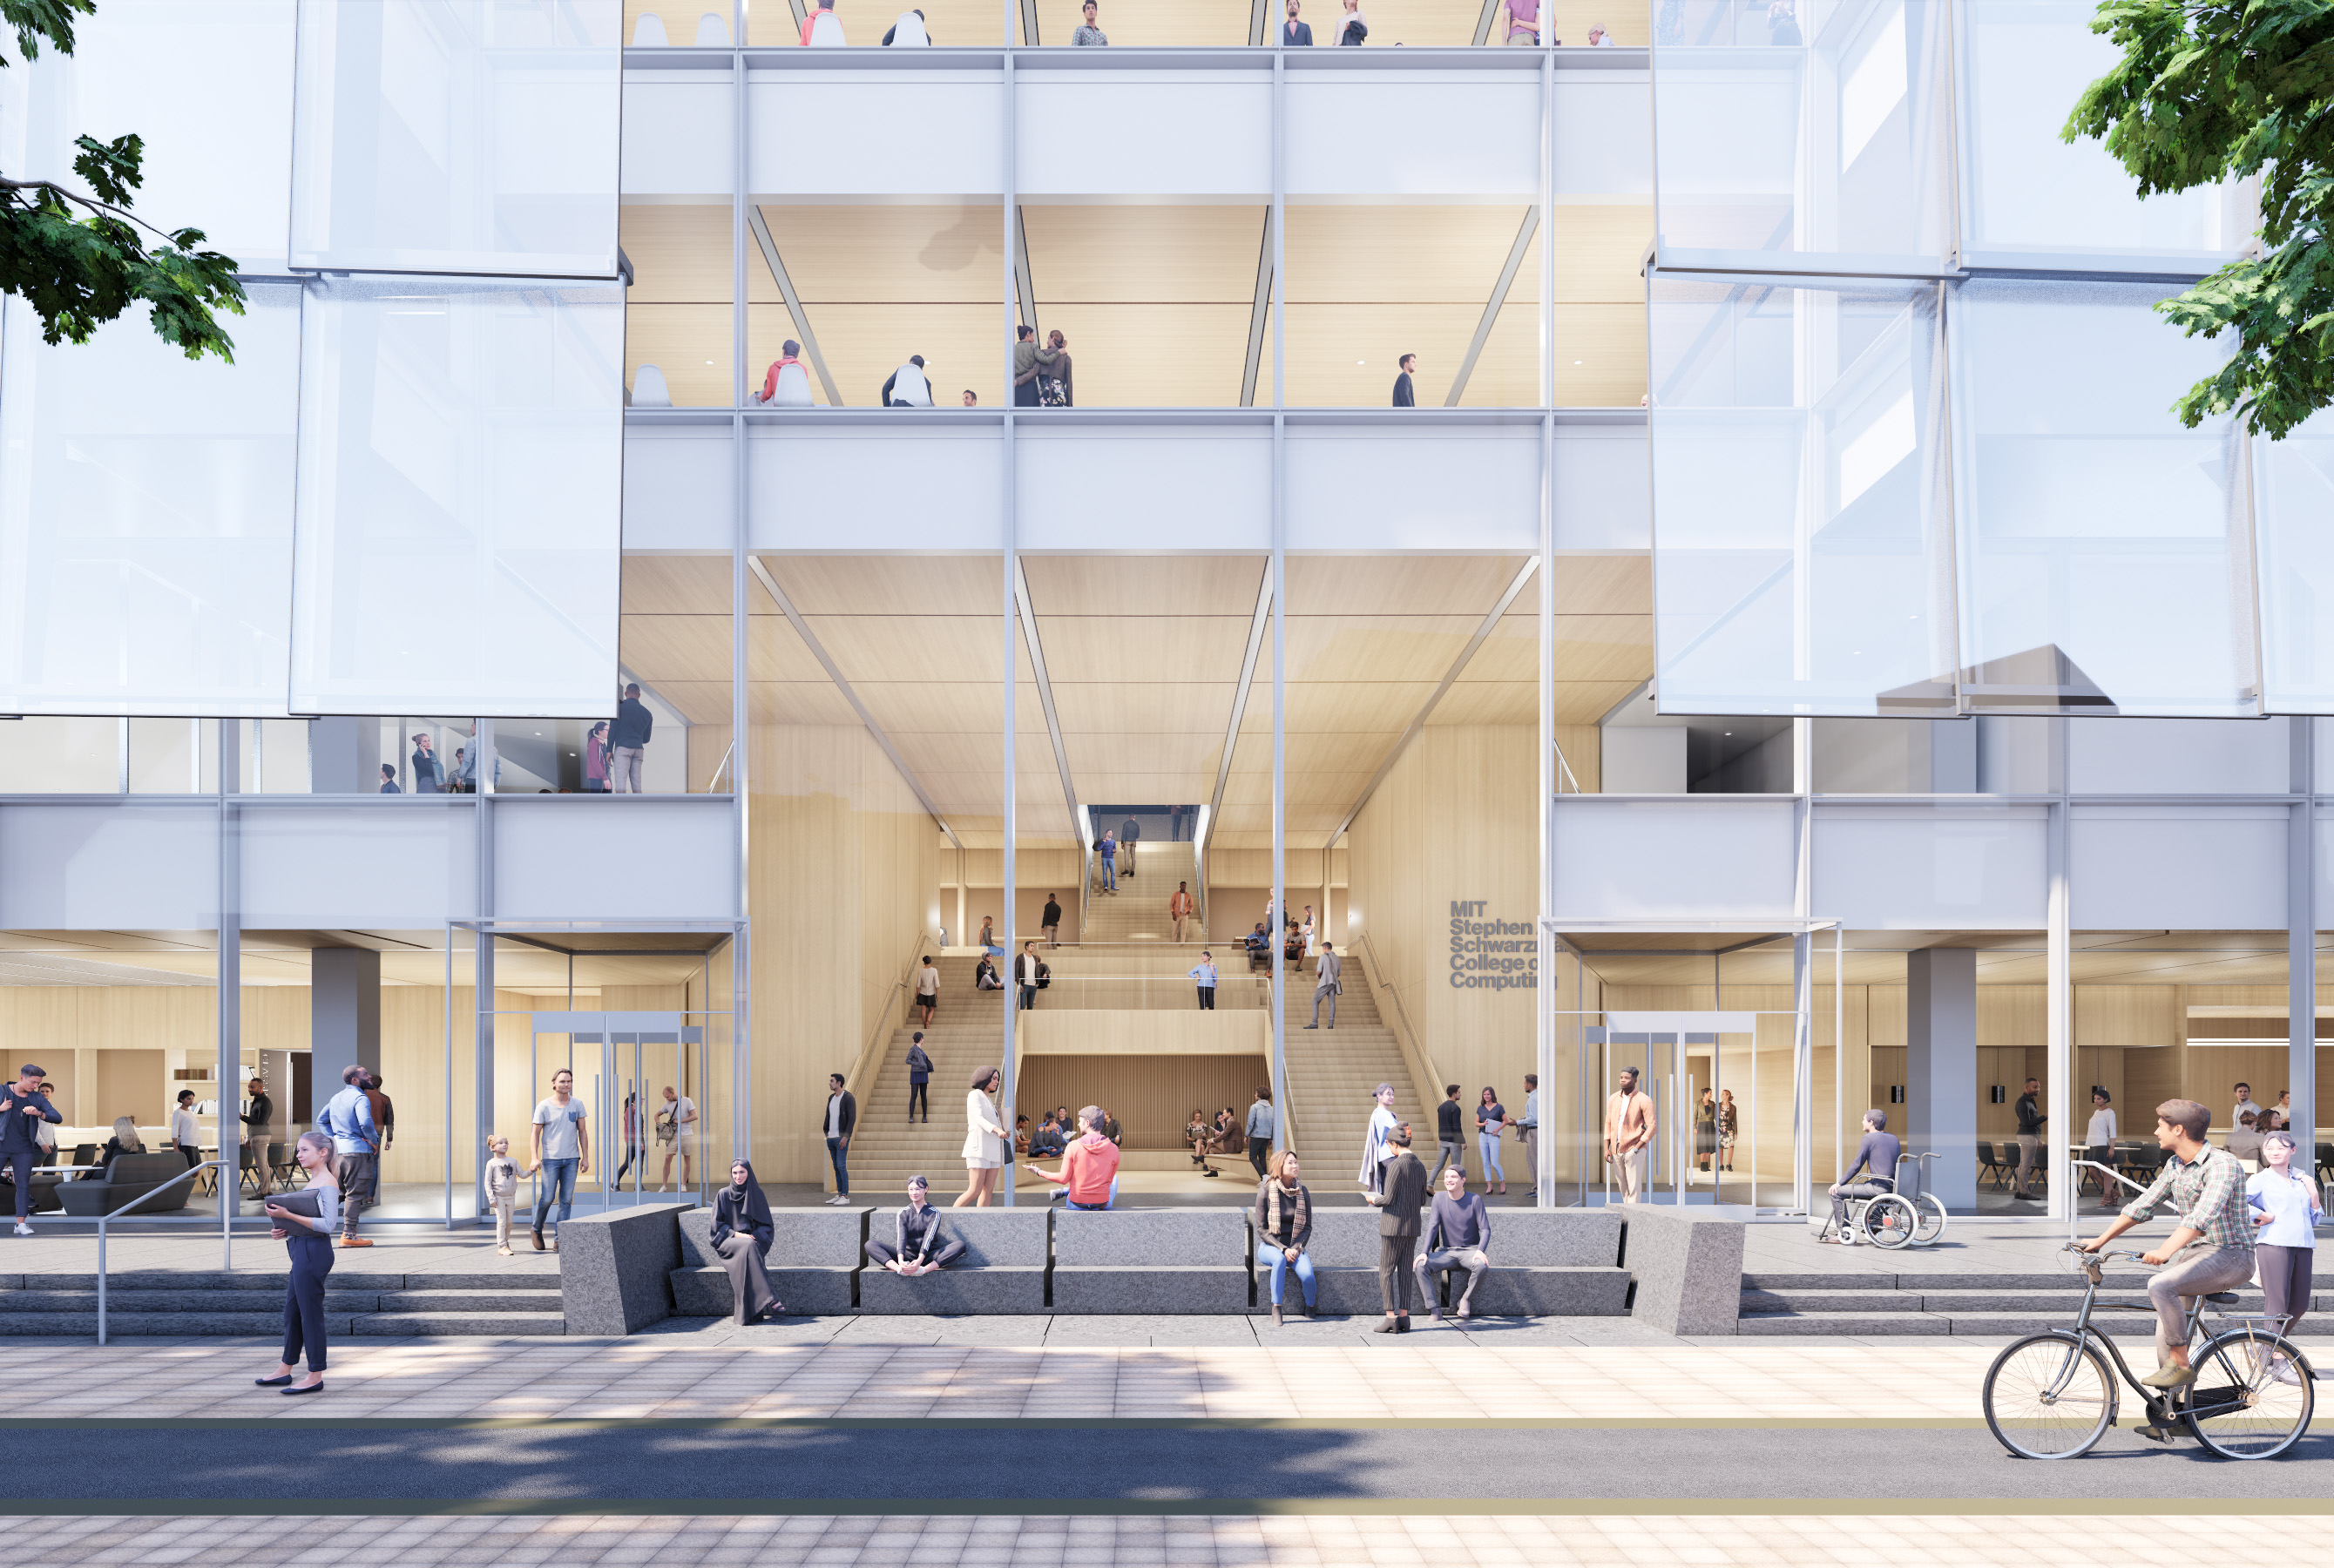 Rendering of bikers and pedestrians in a plaza in front of a glass building.